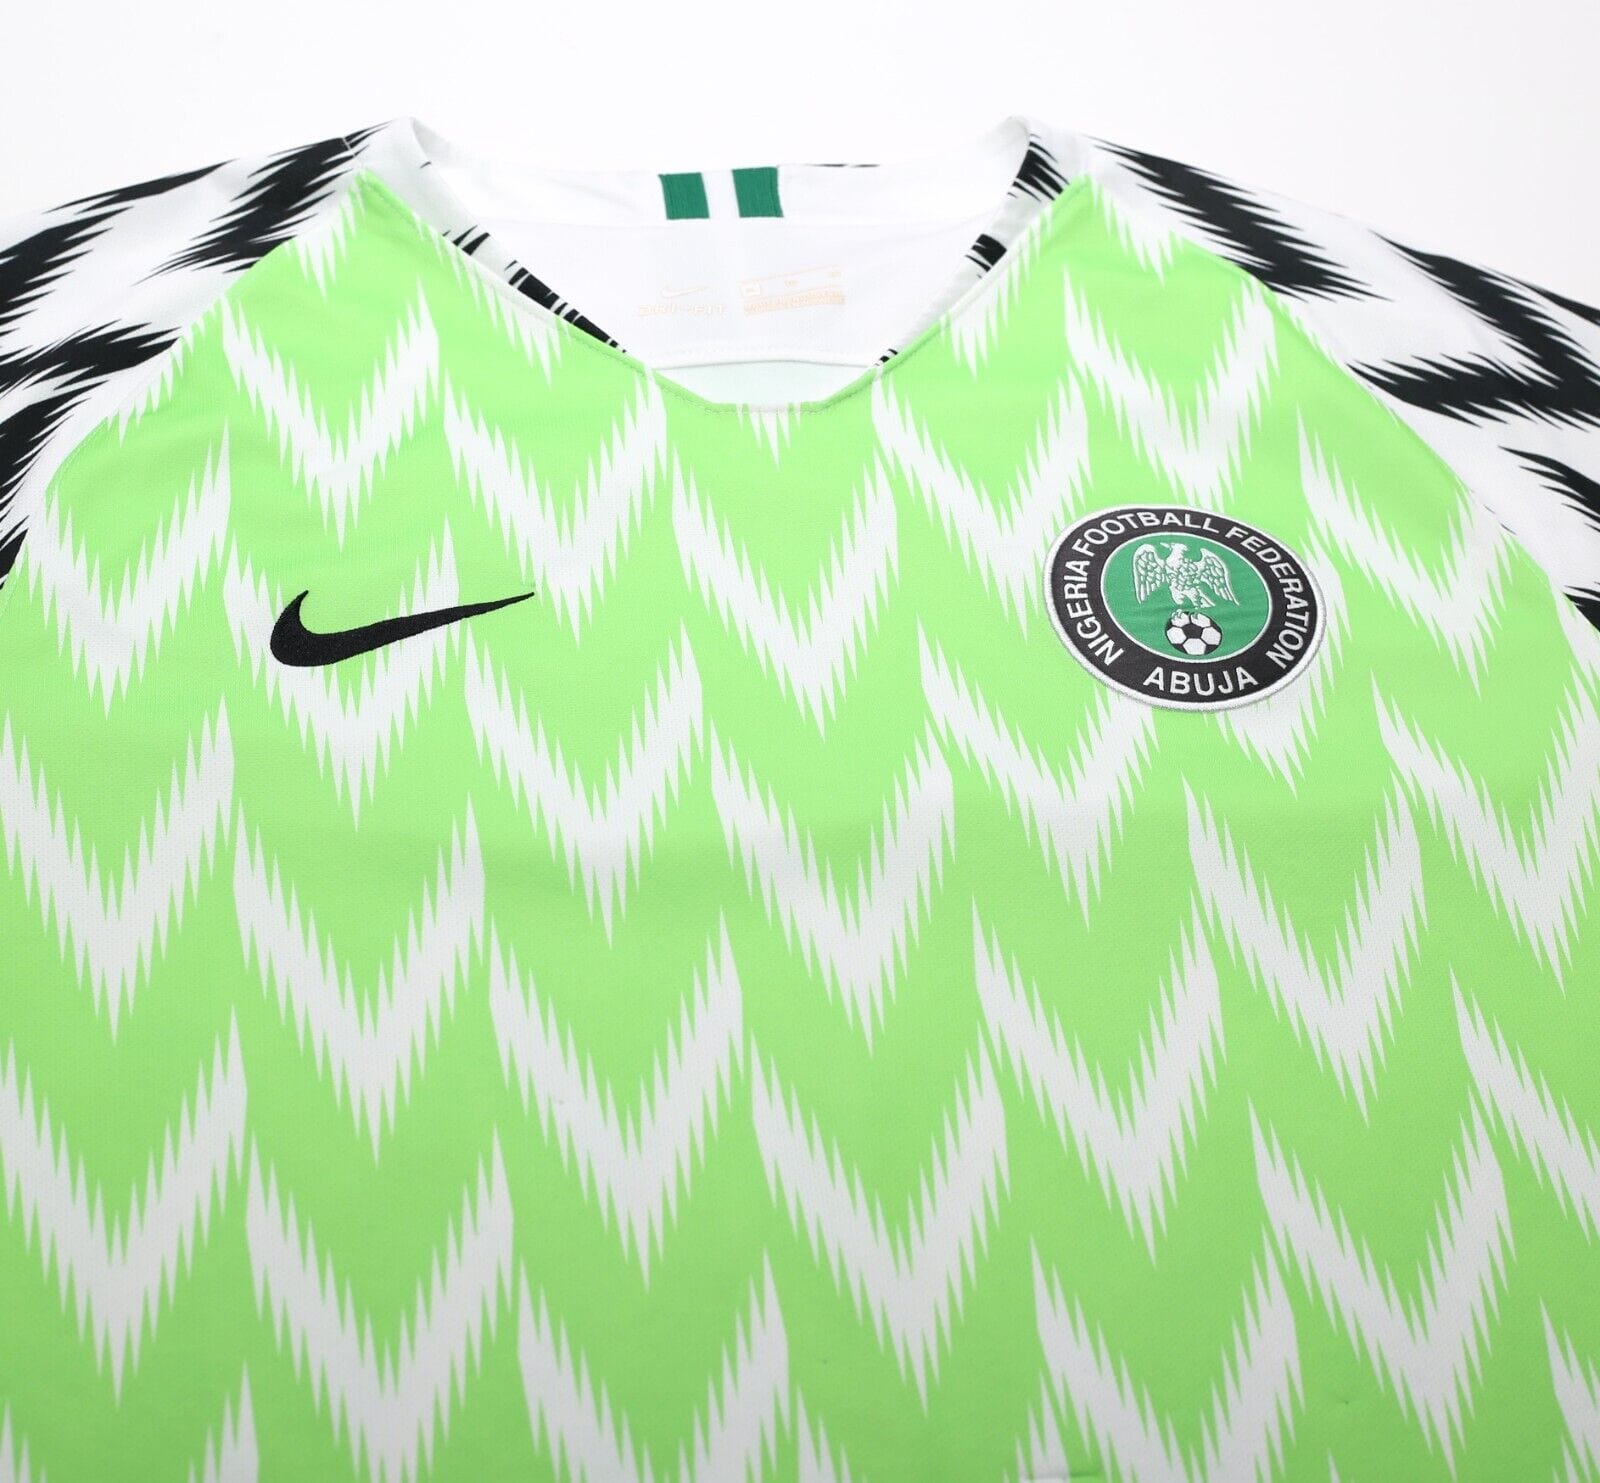 2018/19 NIGERIA Vintage Authentic Nike Home Football Shirt (XL) World Cup 2018